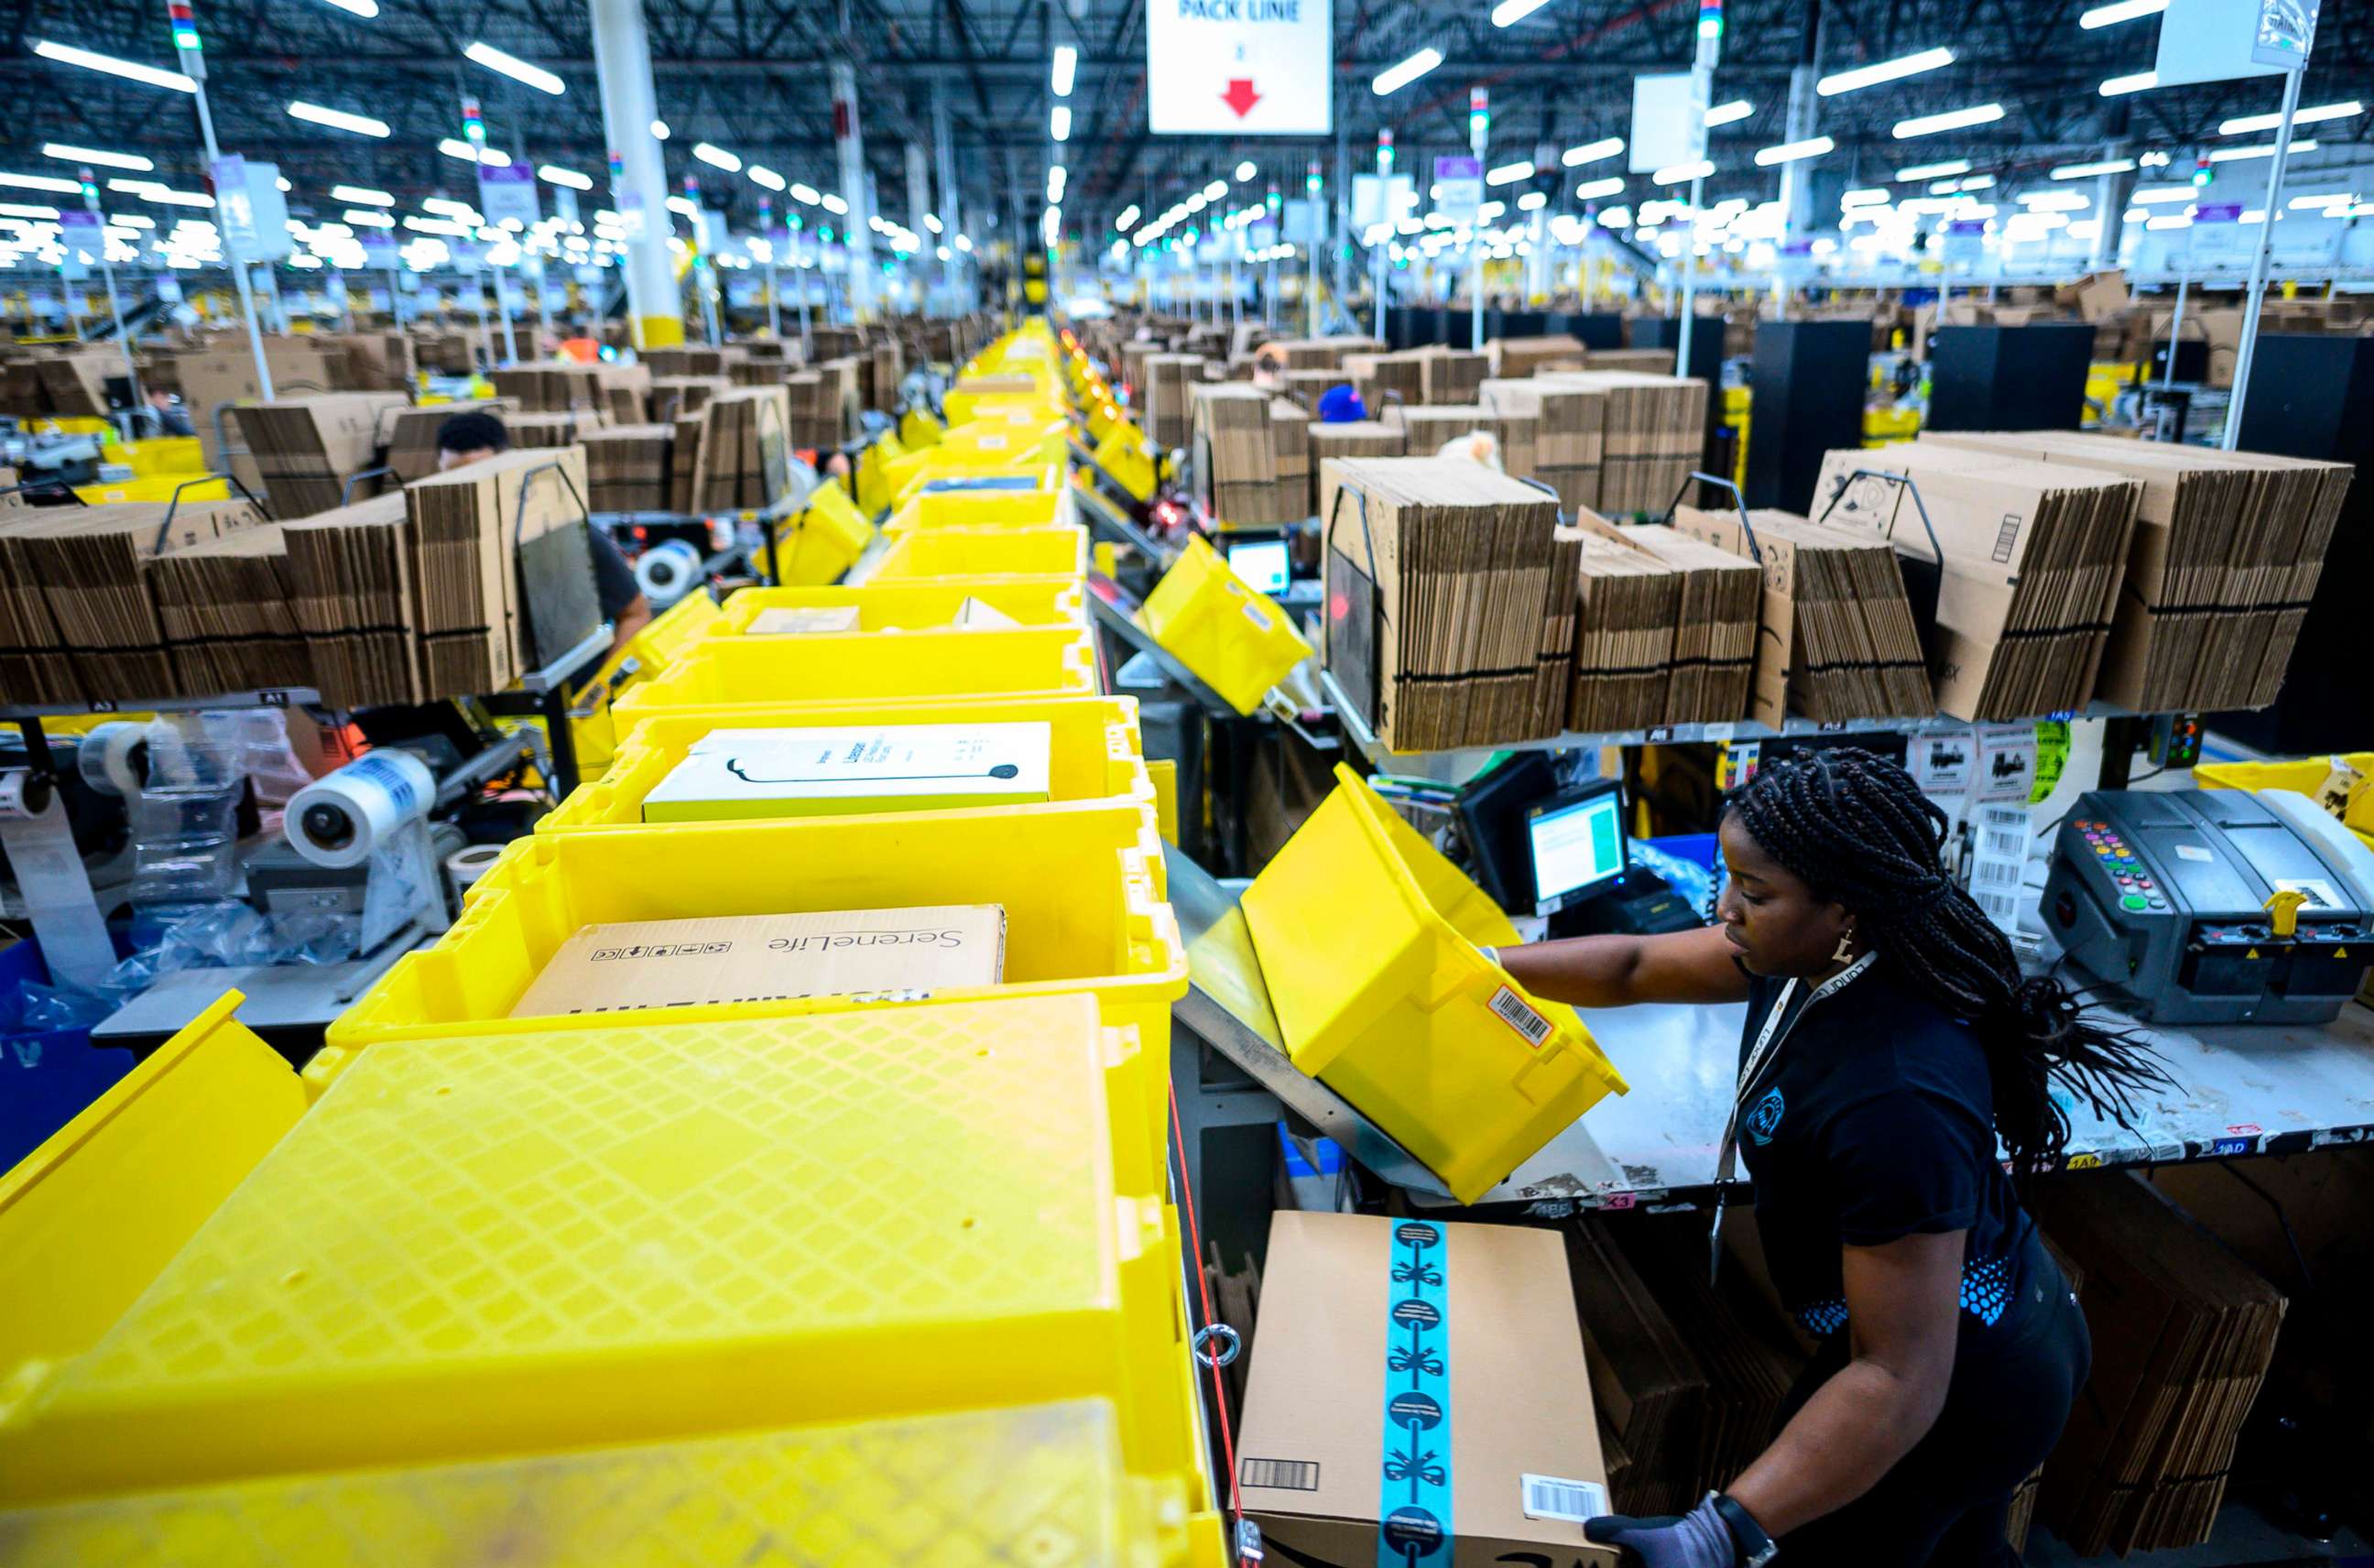 PHOTO: In this file photo taken on February 5, 2019 a woman works at a packing station at the 855,000-square-foot Amazon fulfillment center in Staten Island, New York.